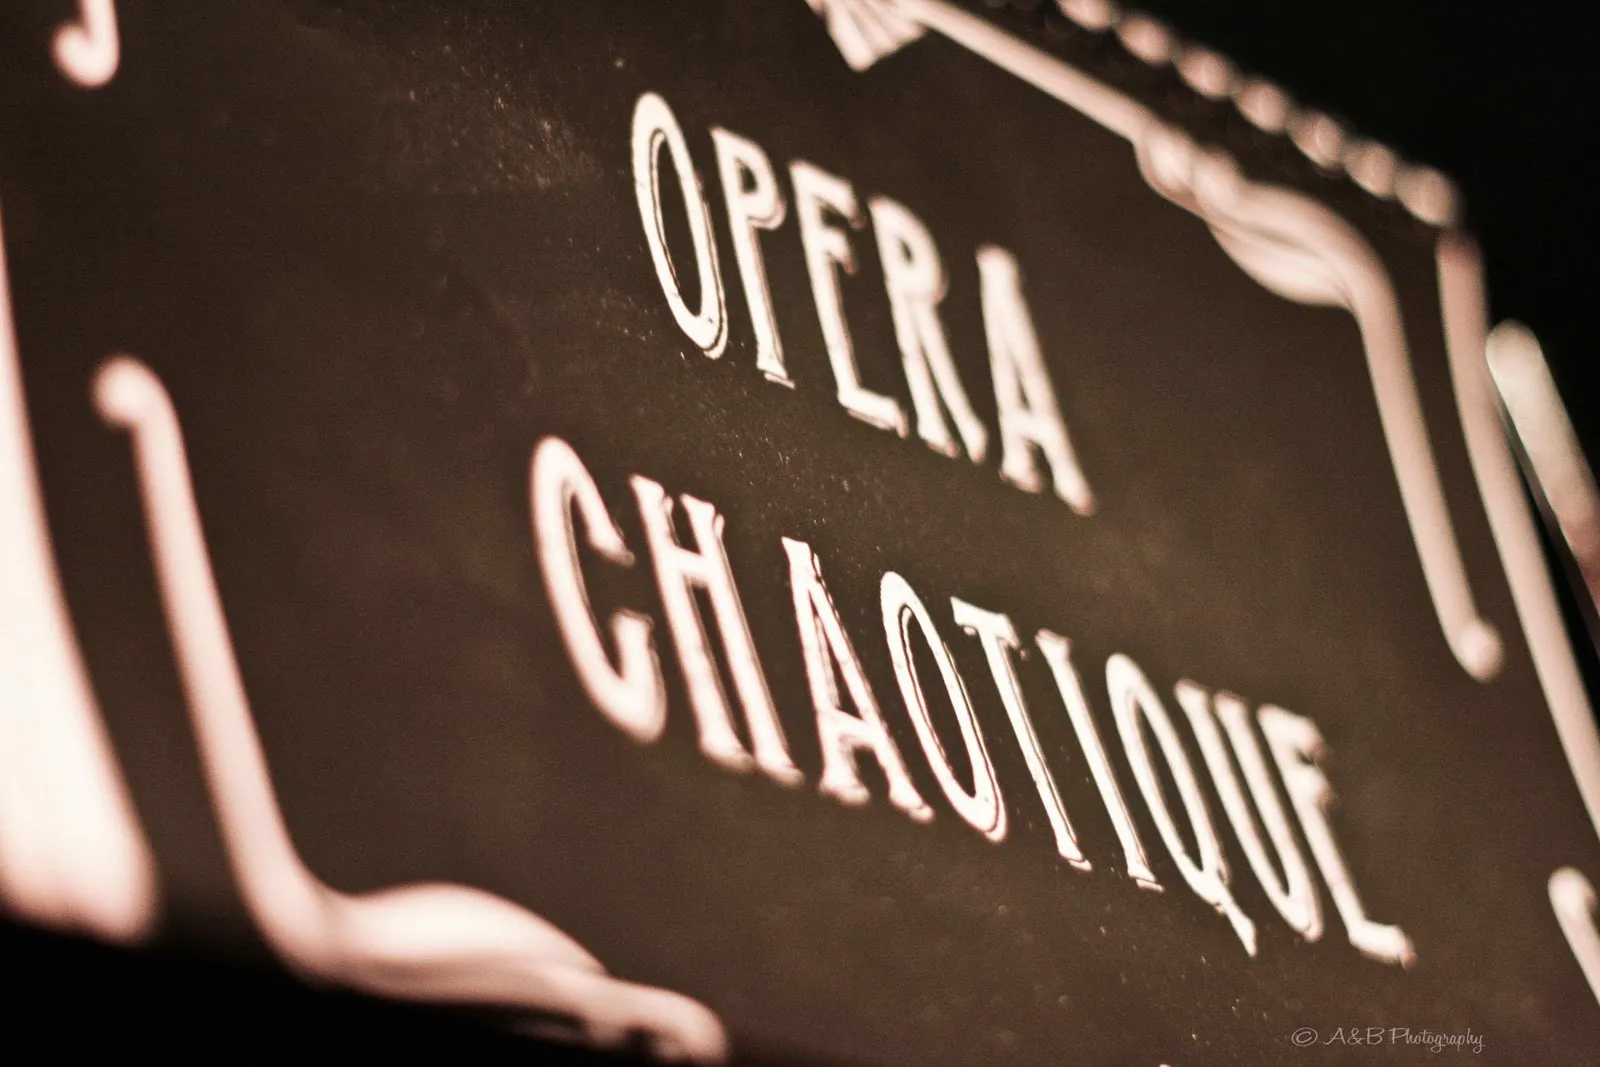 Opera Chaotique @ Faust